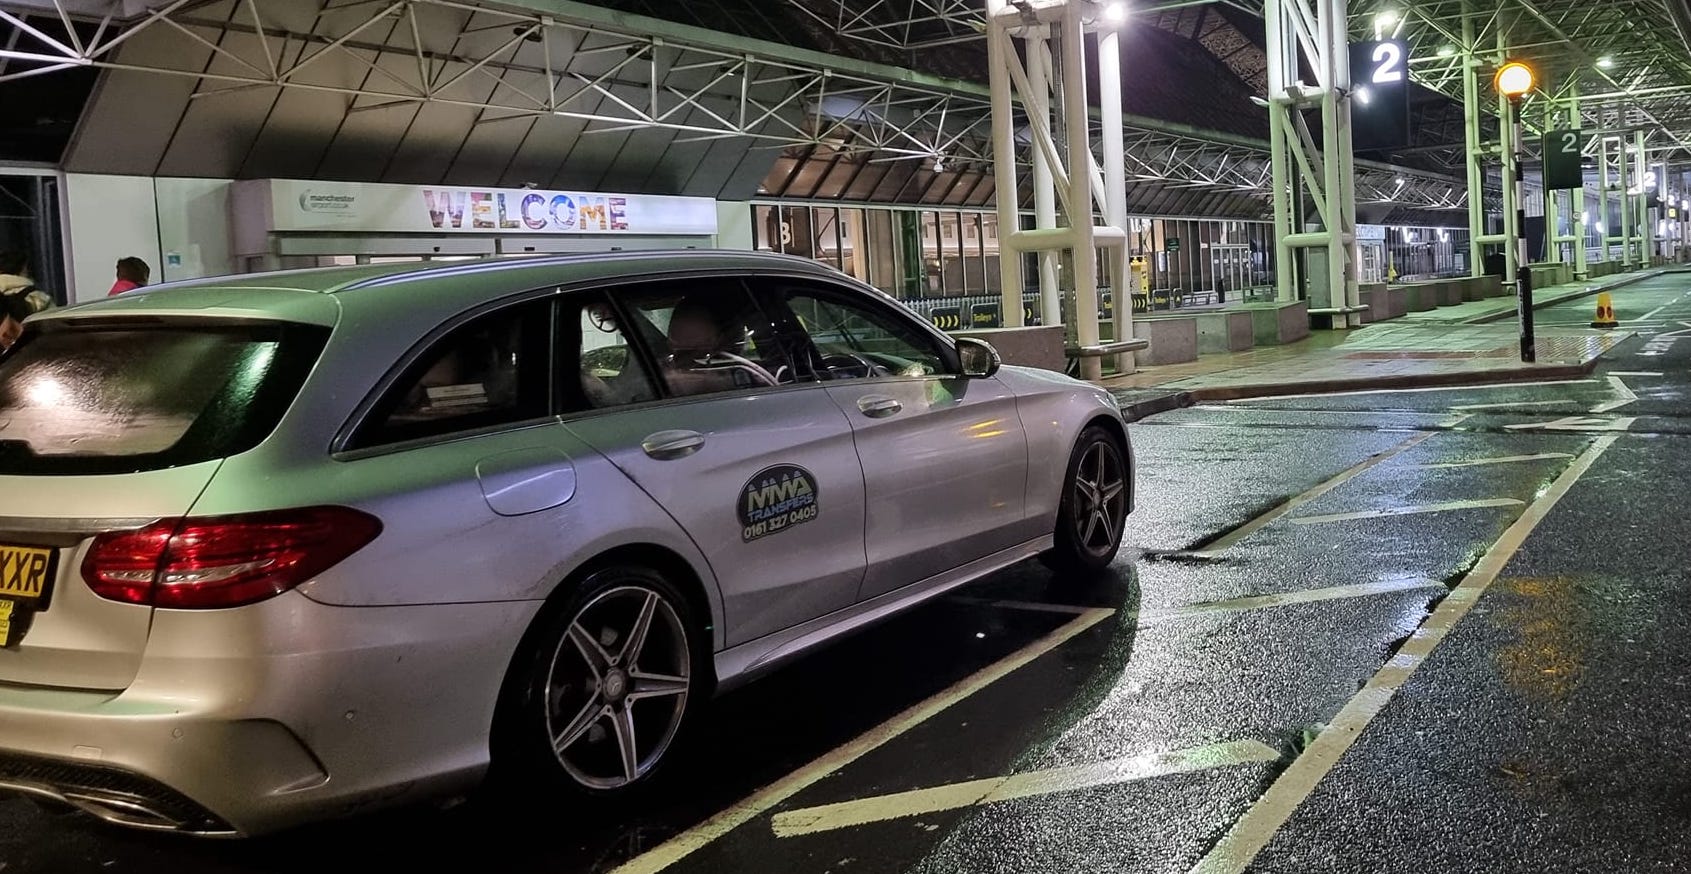 Take a Taxi from Manchester Airport to London with a free Meet and Greet Service